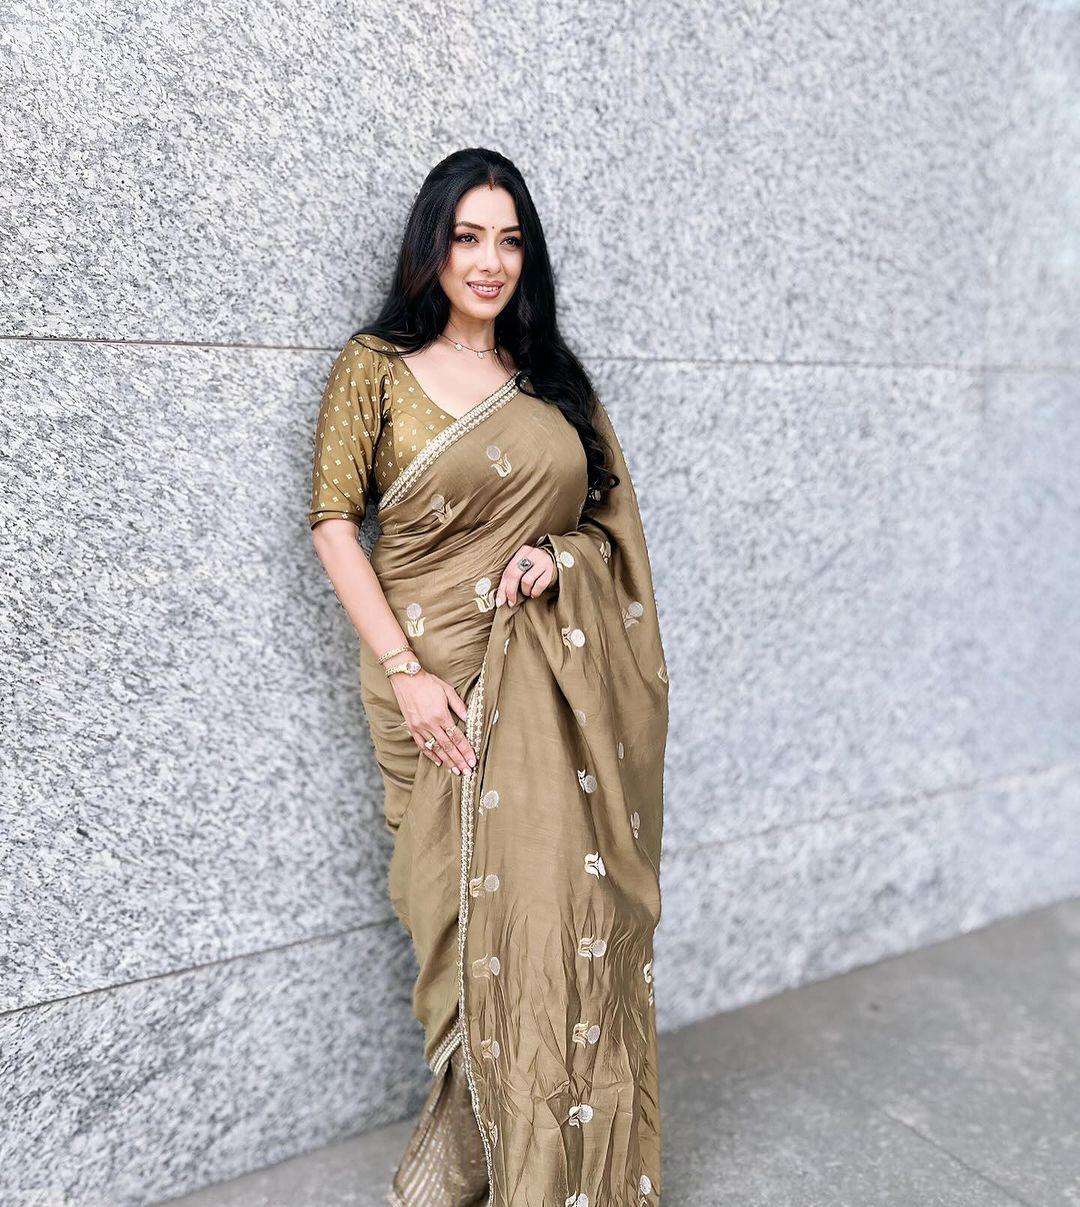 Rupali Ganguly, who recently made headlines for joining politics, has a knack for sarees. Her sarees always make us go wow